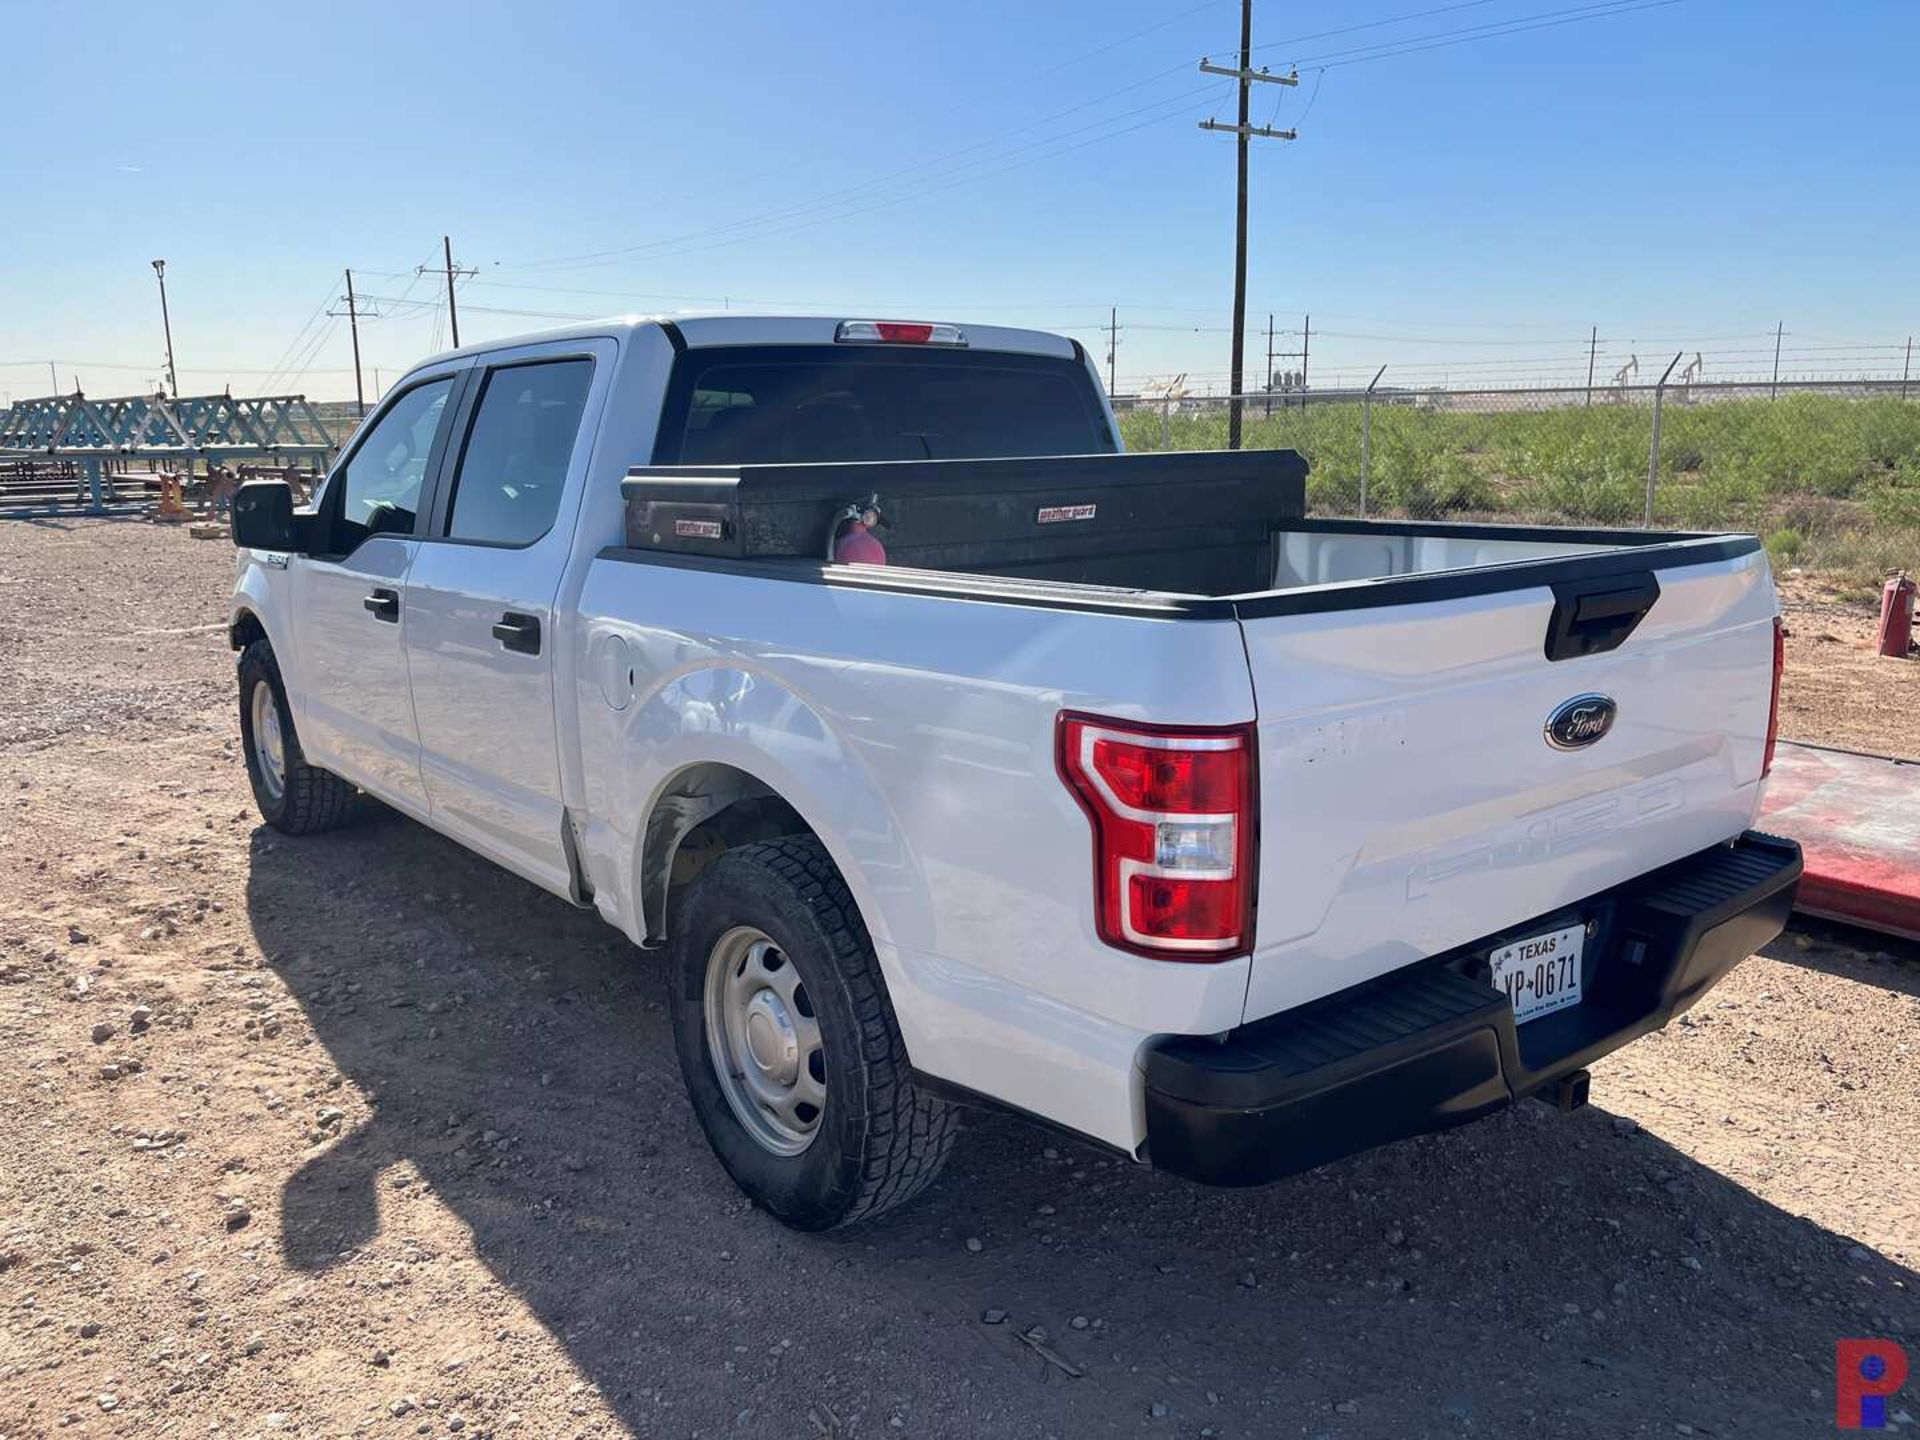 2019 FORD F-150 CREW CAB PICKUP TRUCK - Image 4 of 7